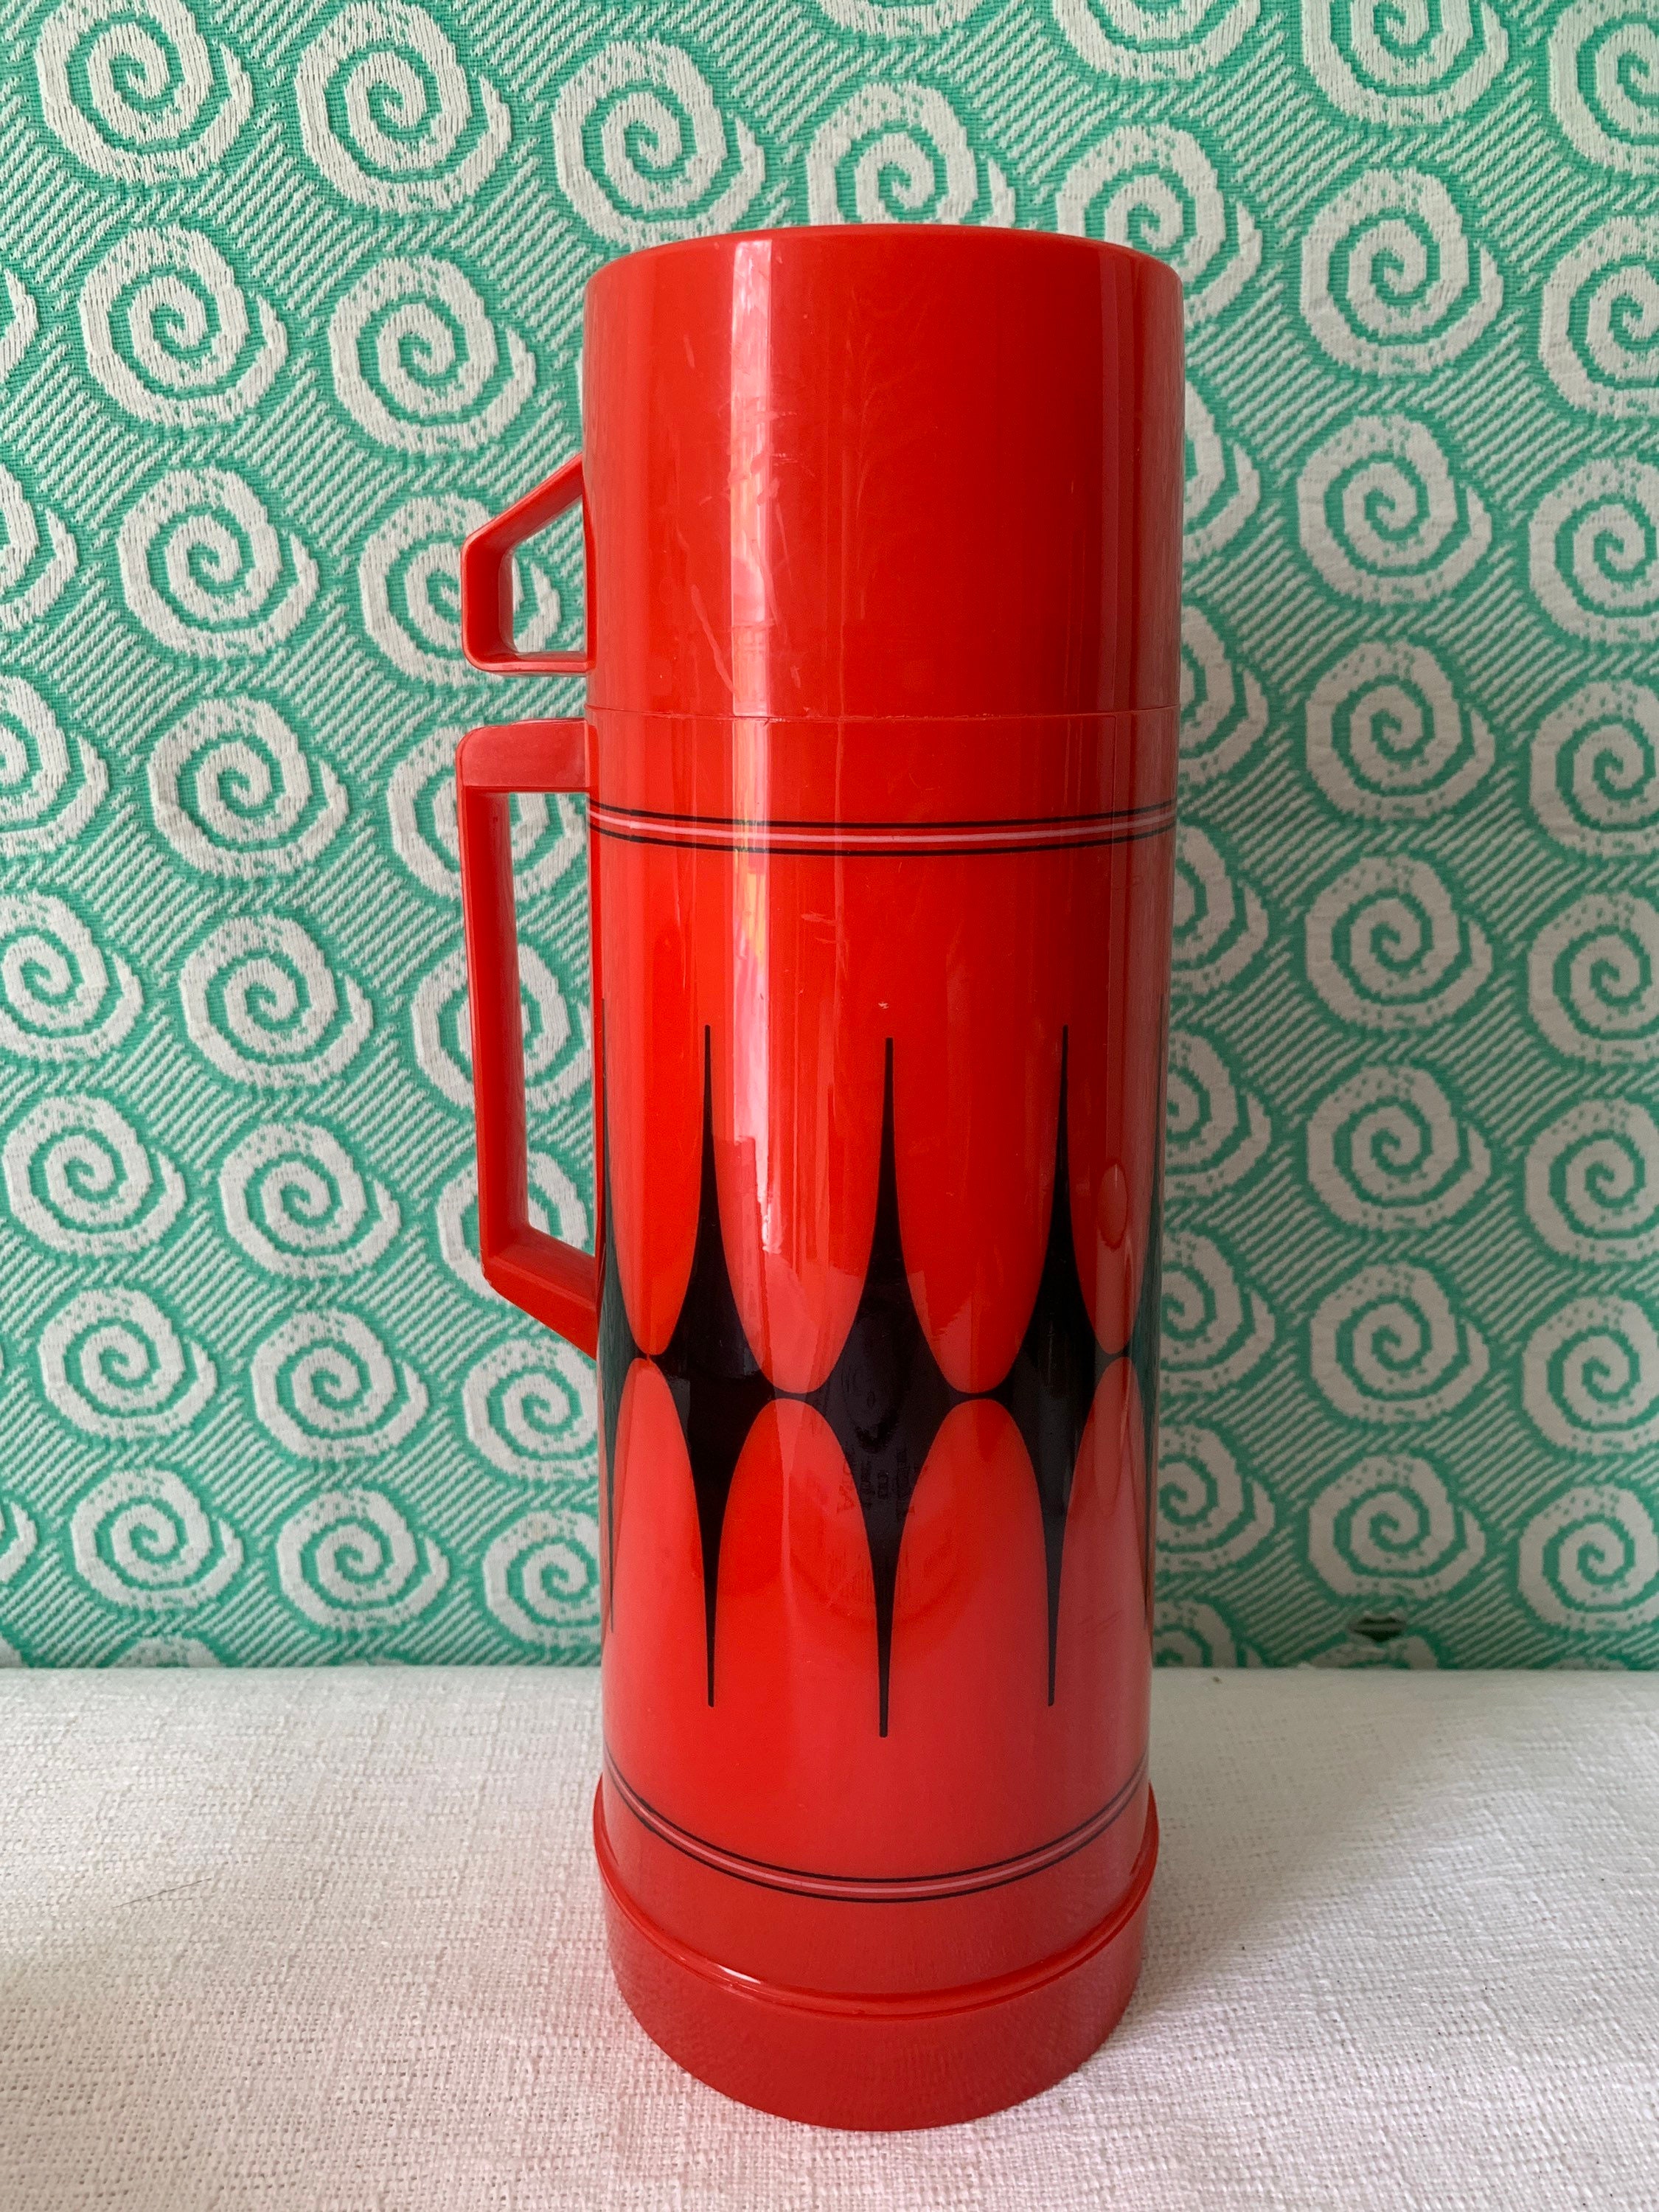 Aladdin Stanley Thermos Red and Tan Wide Mouth Thermos 1